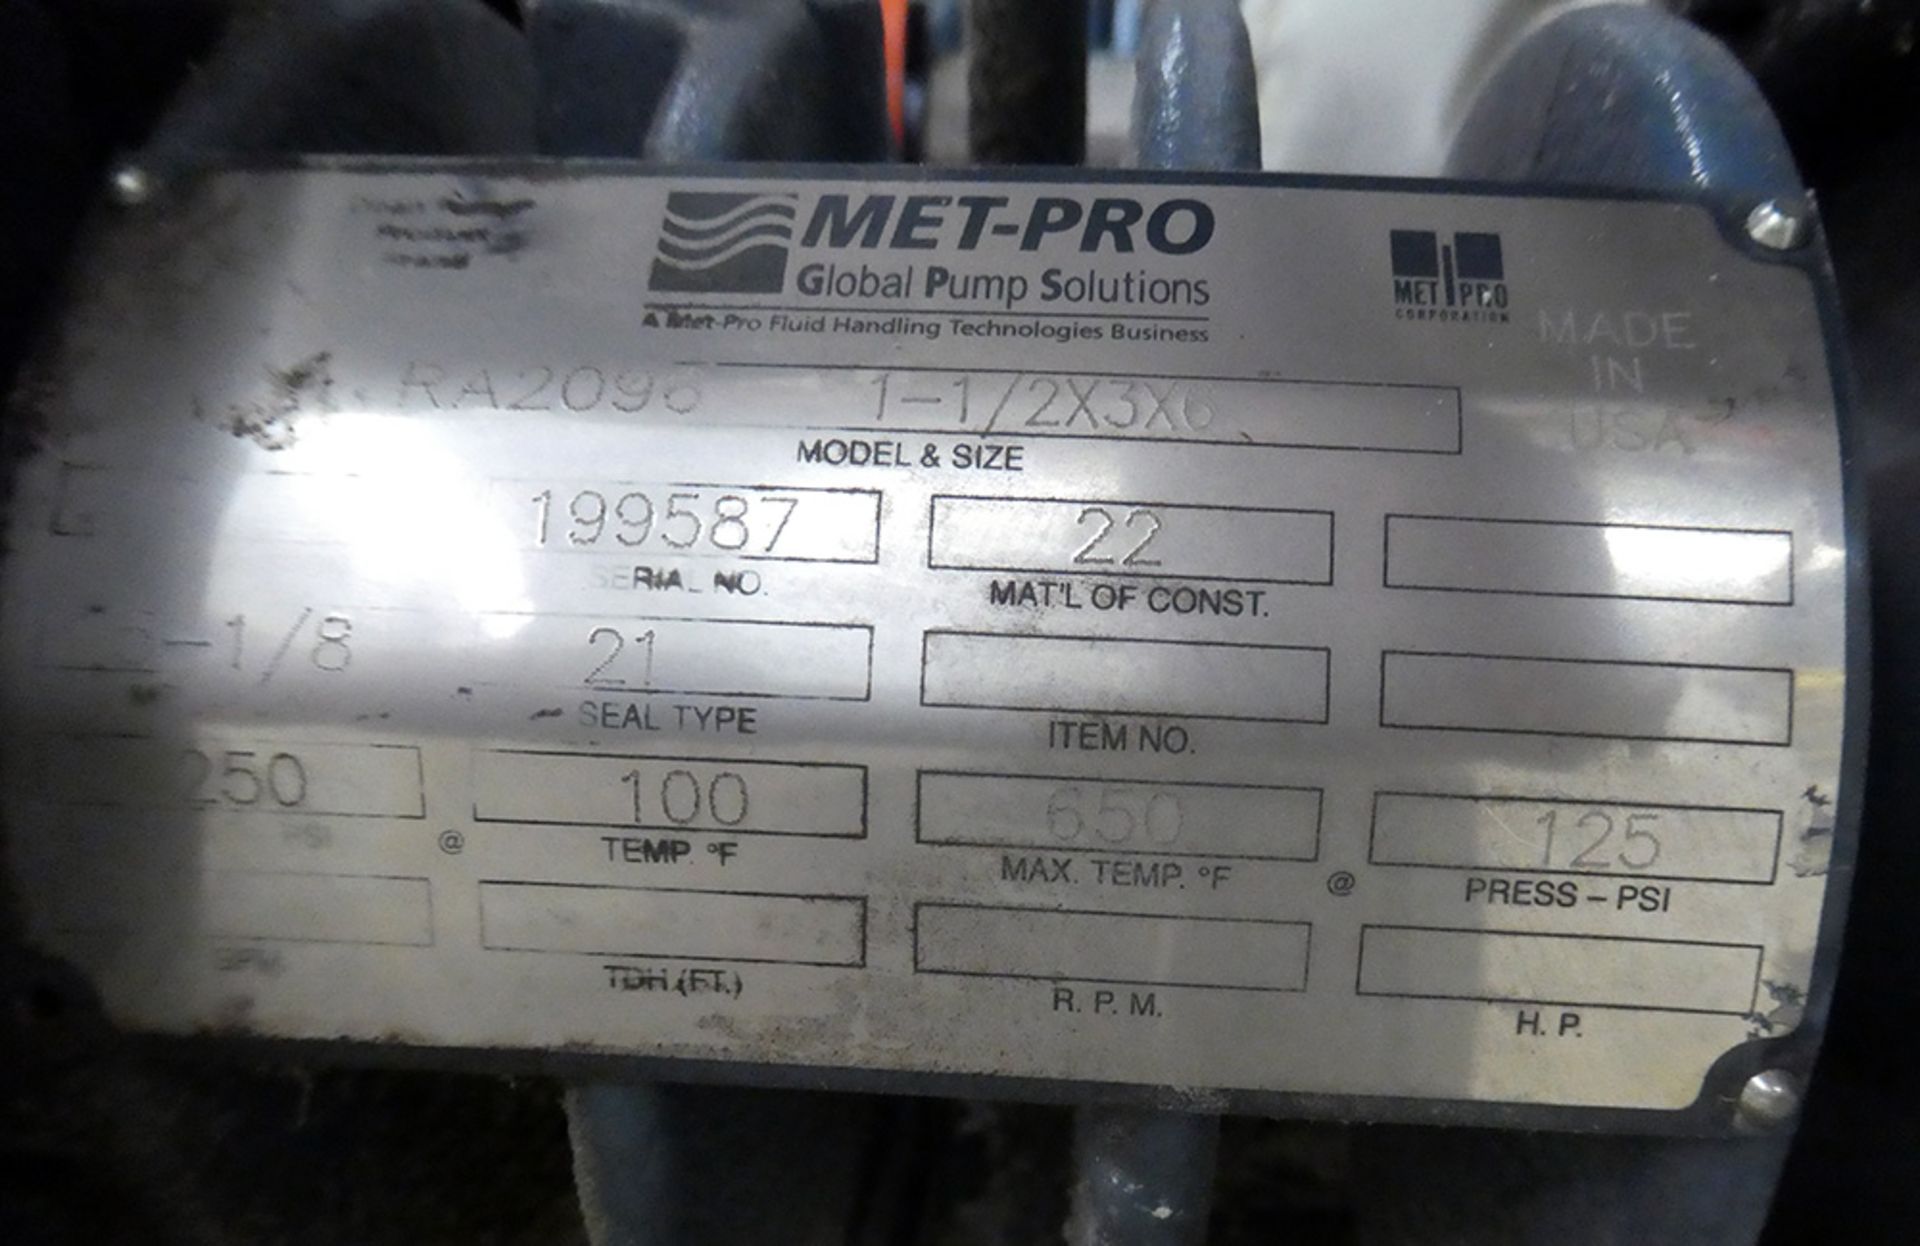 Met-Pro RA-2096 10 HP Centrifugal Hot Oil Pump - Image 2 of 3